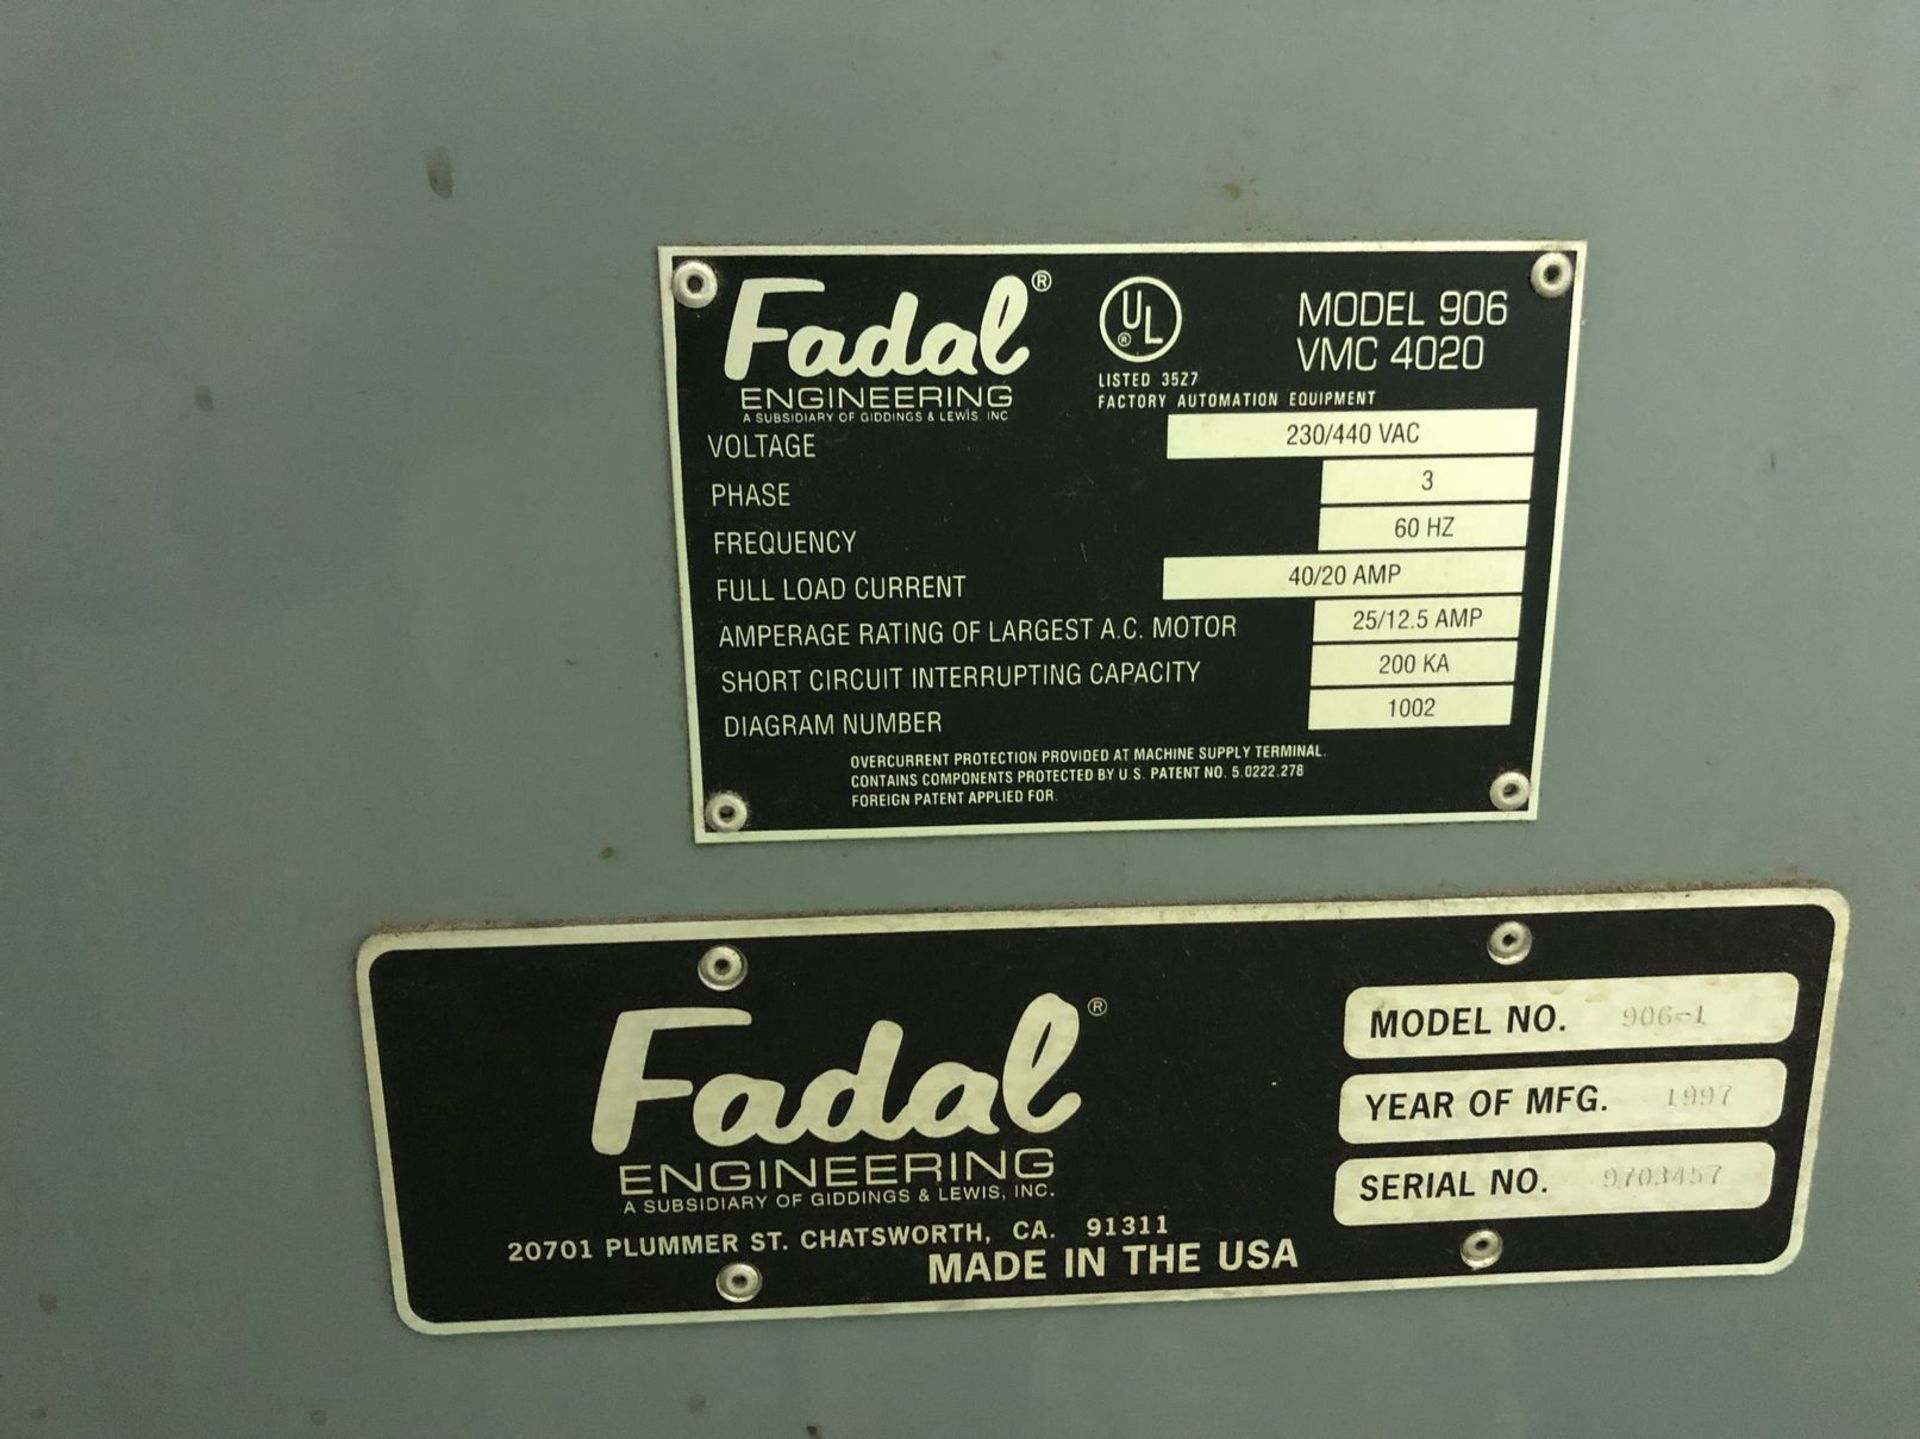 Fadal 906-1 4020 CNC Vertical Machining Center - Image 11 of 12